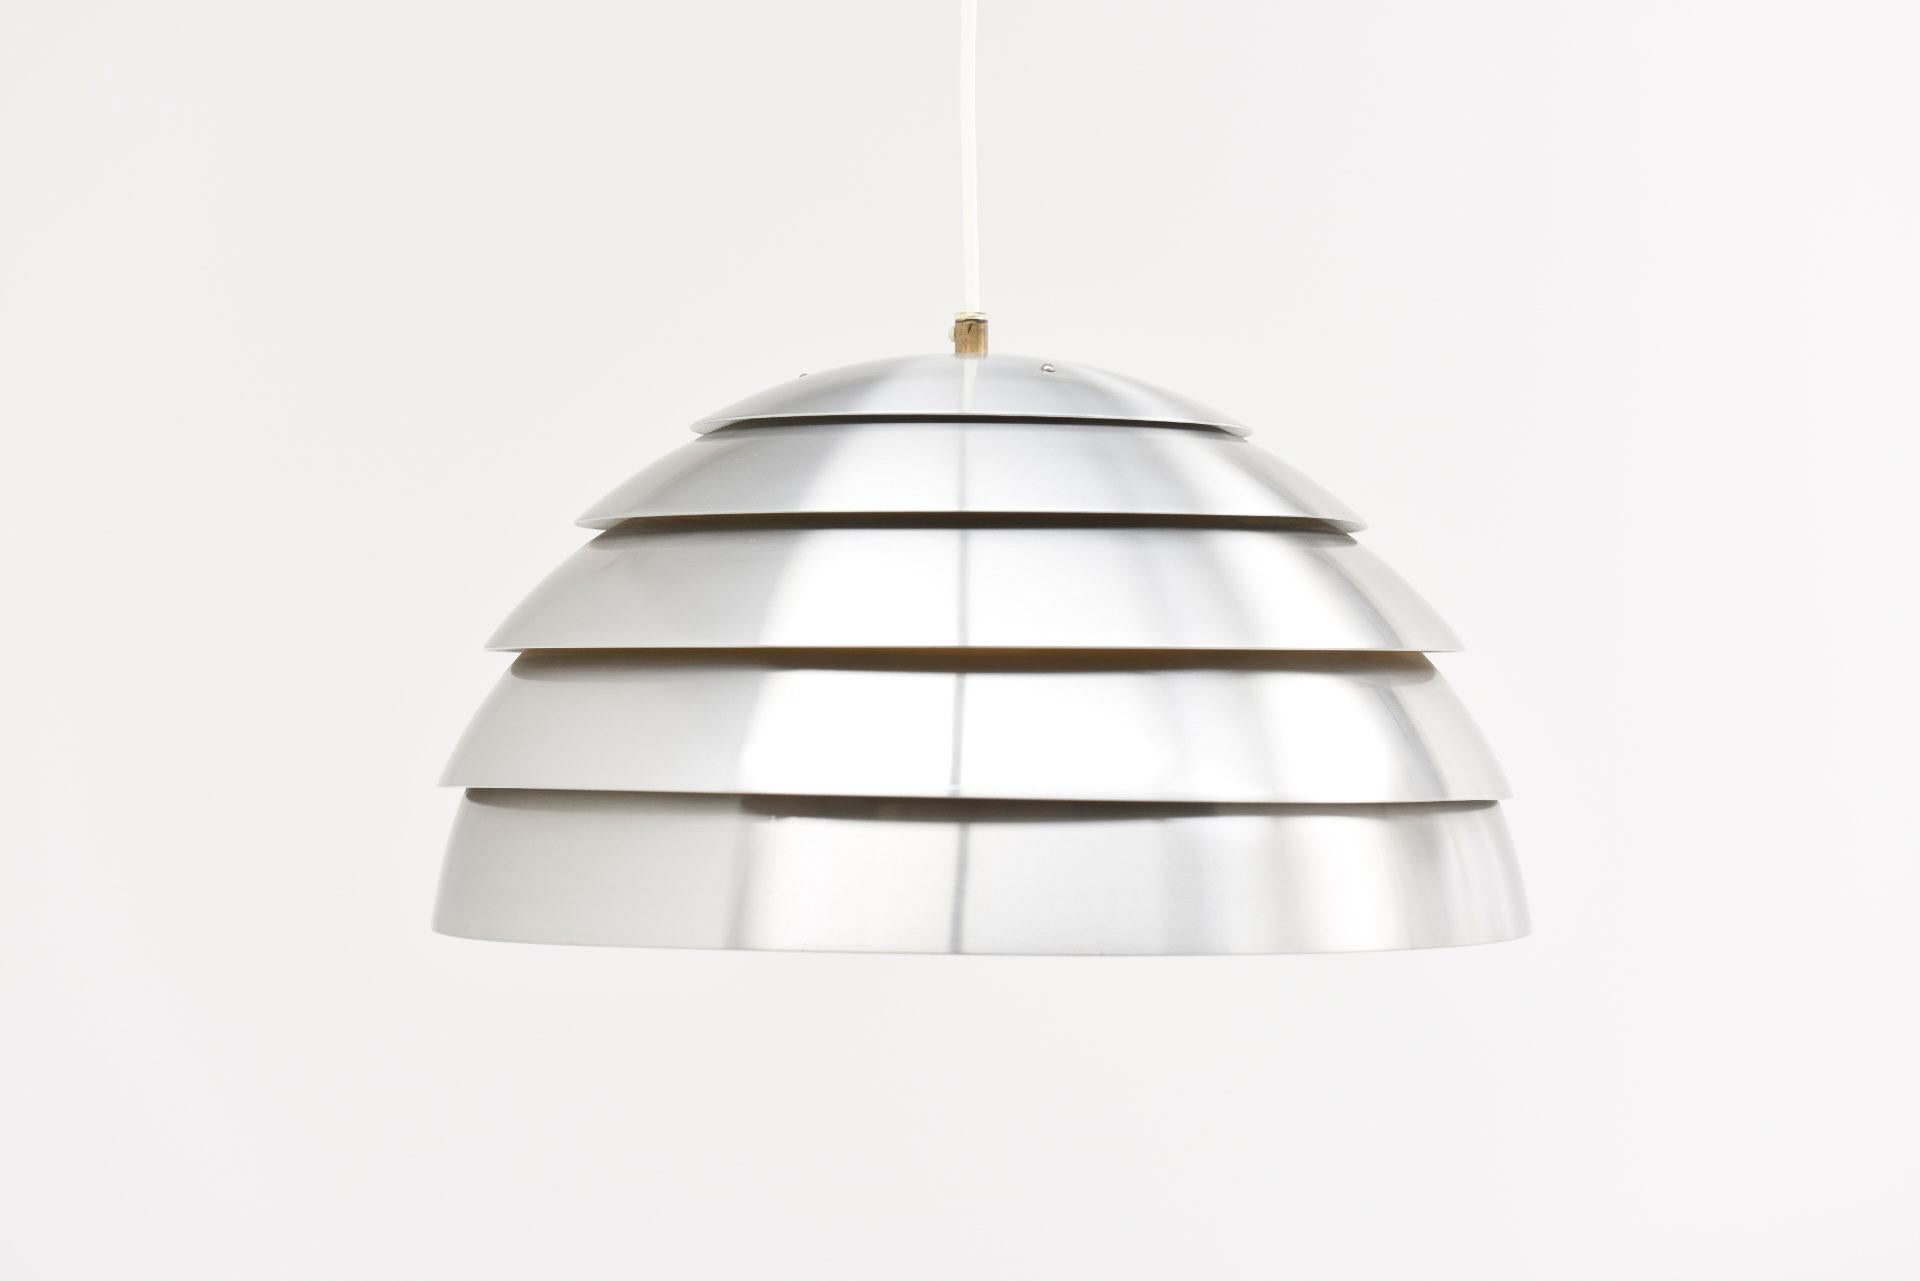 Pendant in aluminium with grey lacquered shade.
Design by Hans Agne Jakobsson and made by Markaryd in Sweden.